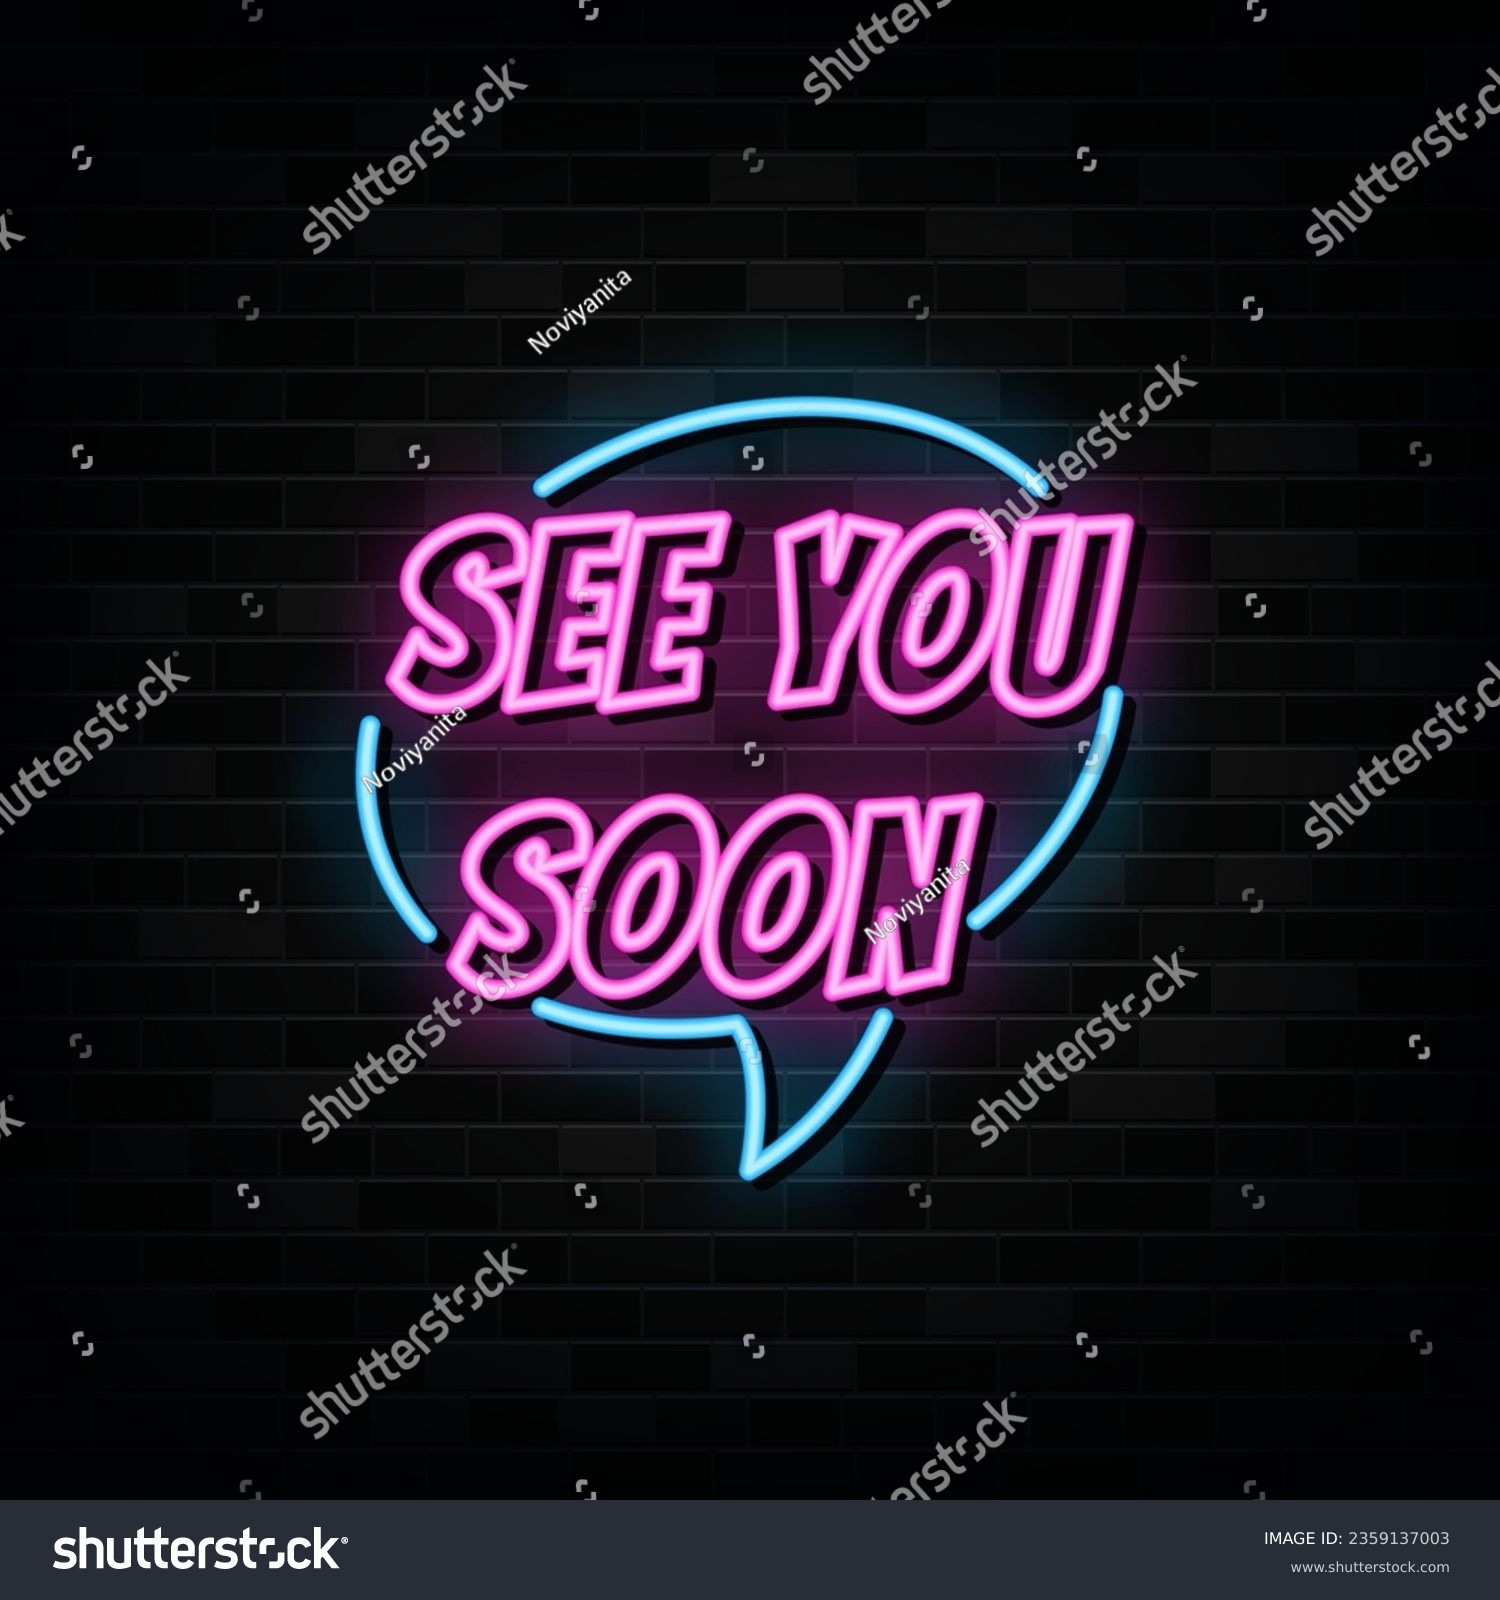 SVG of See You Soon Neon Signs Vector Design Template svg